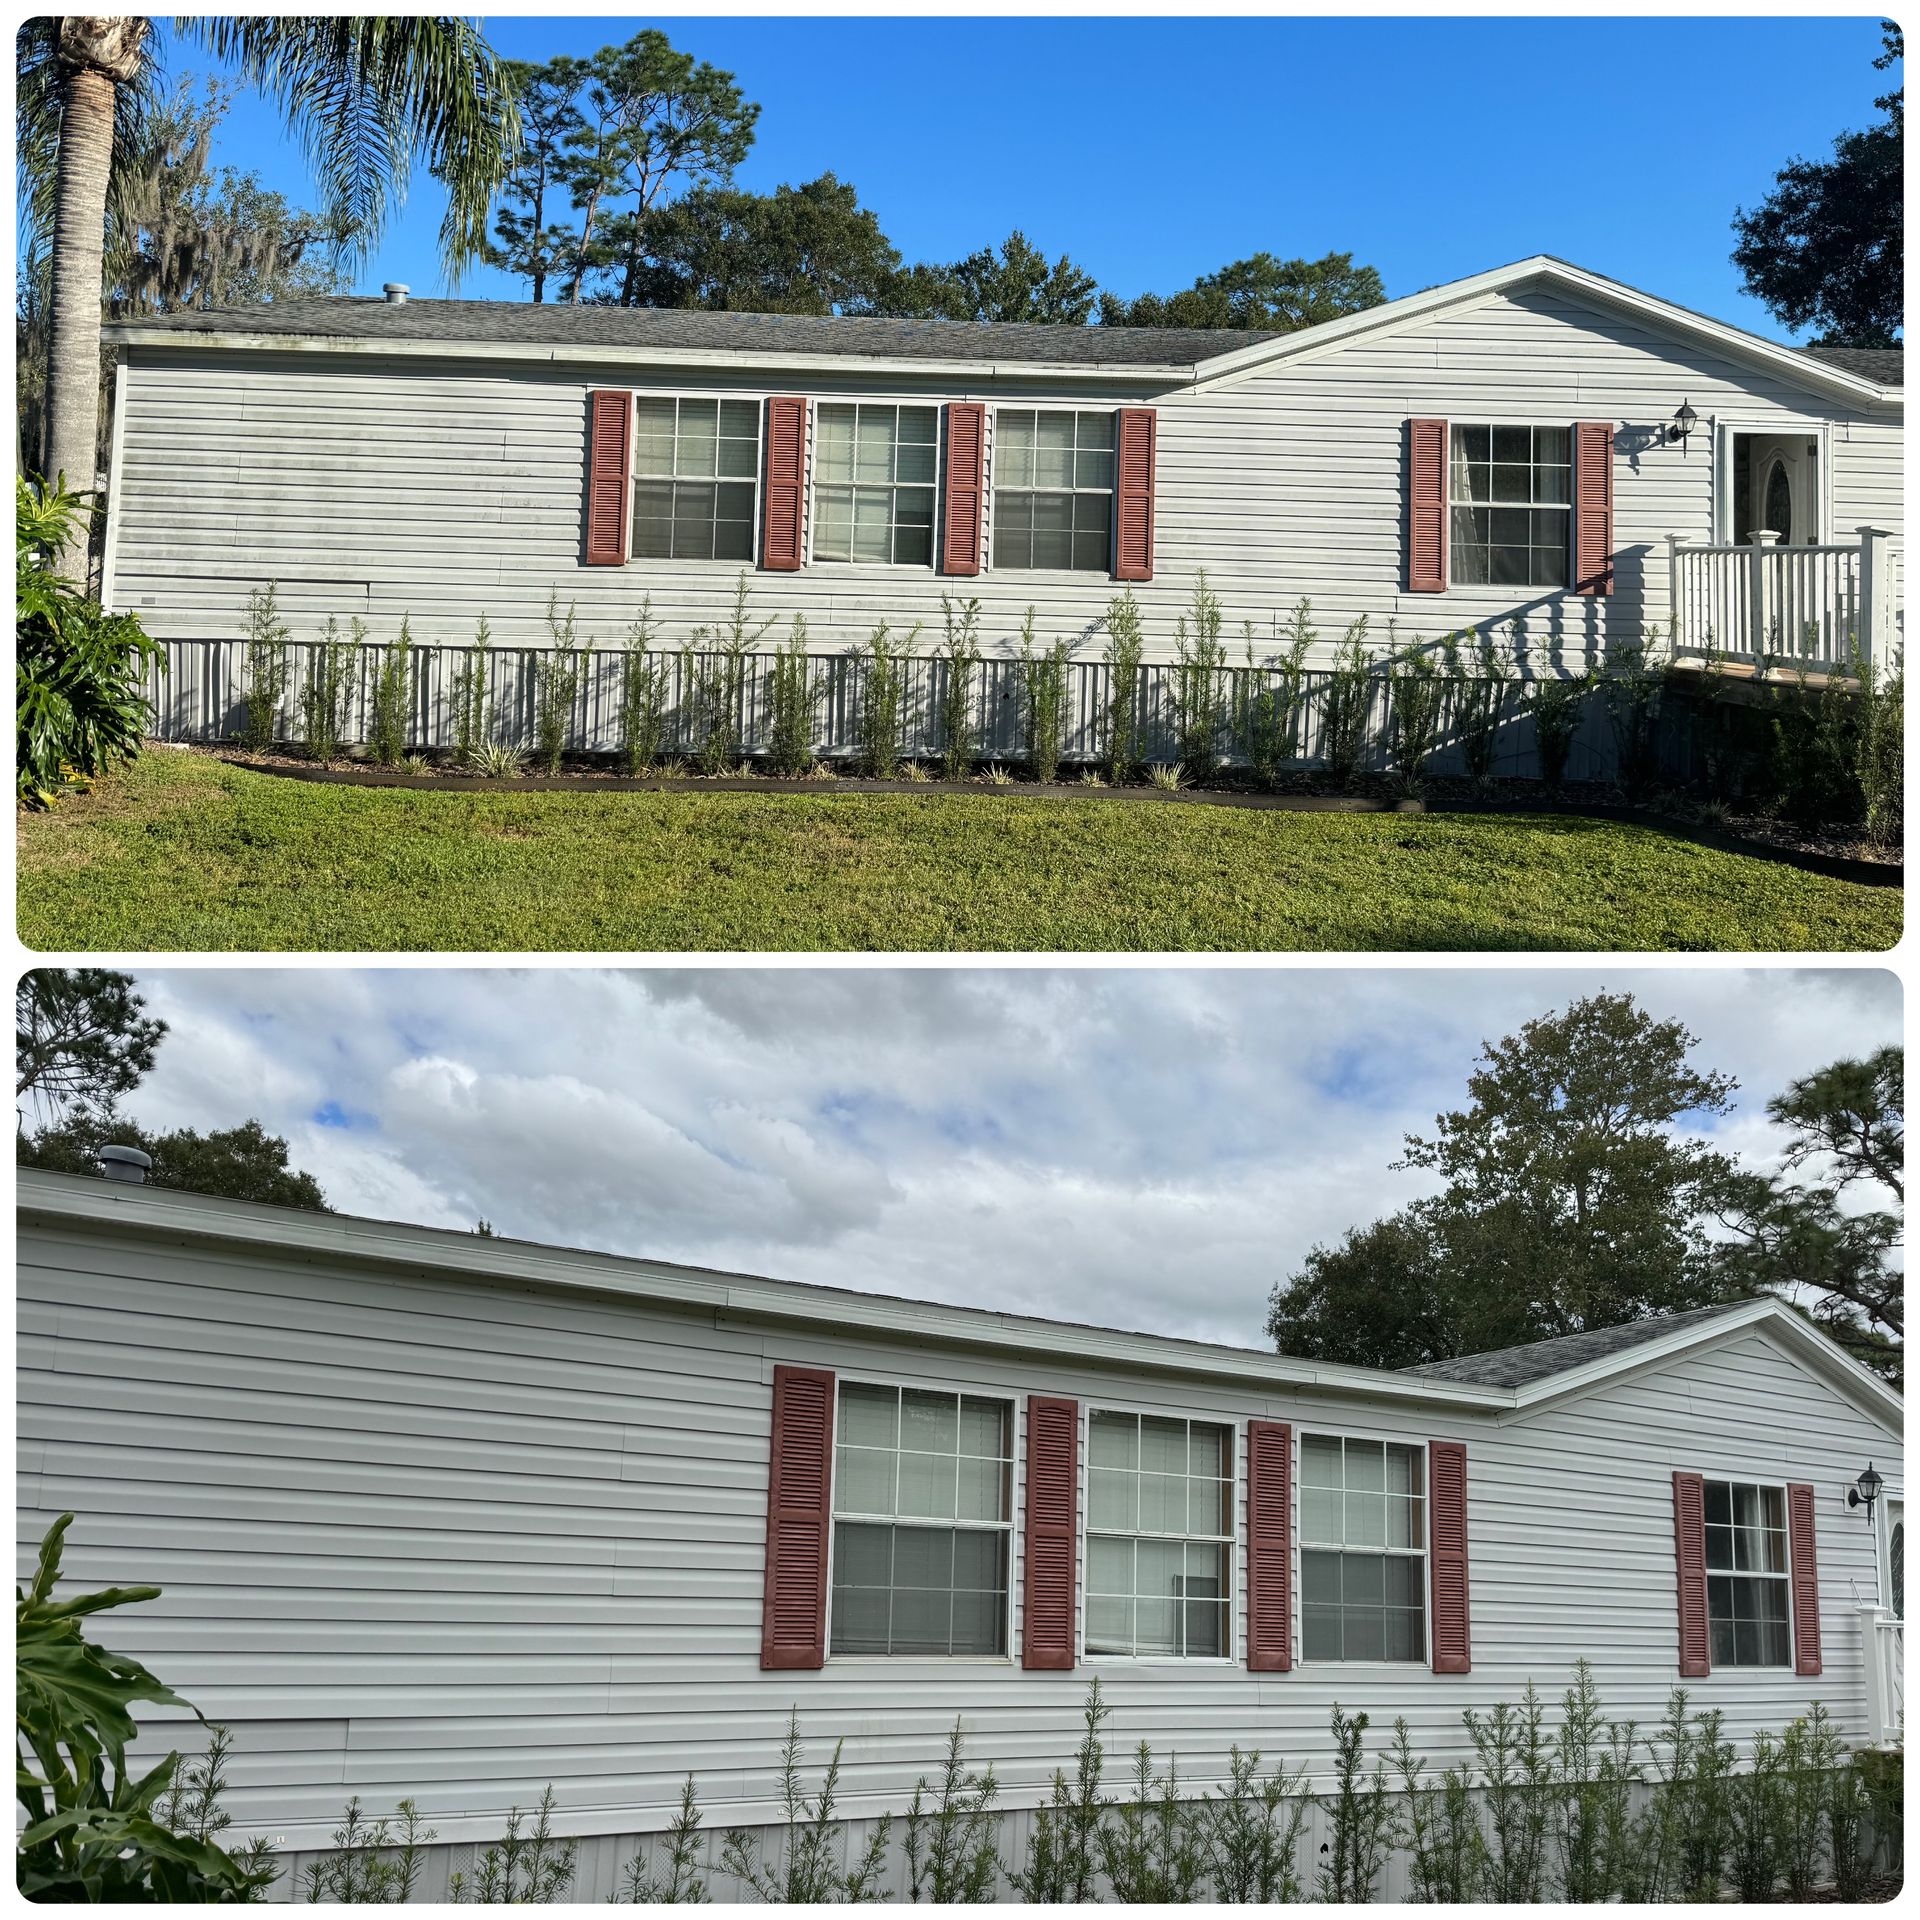 A before and after picture of a mobile home with red shutters